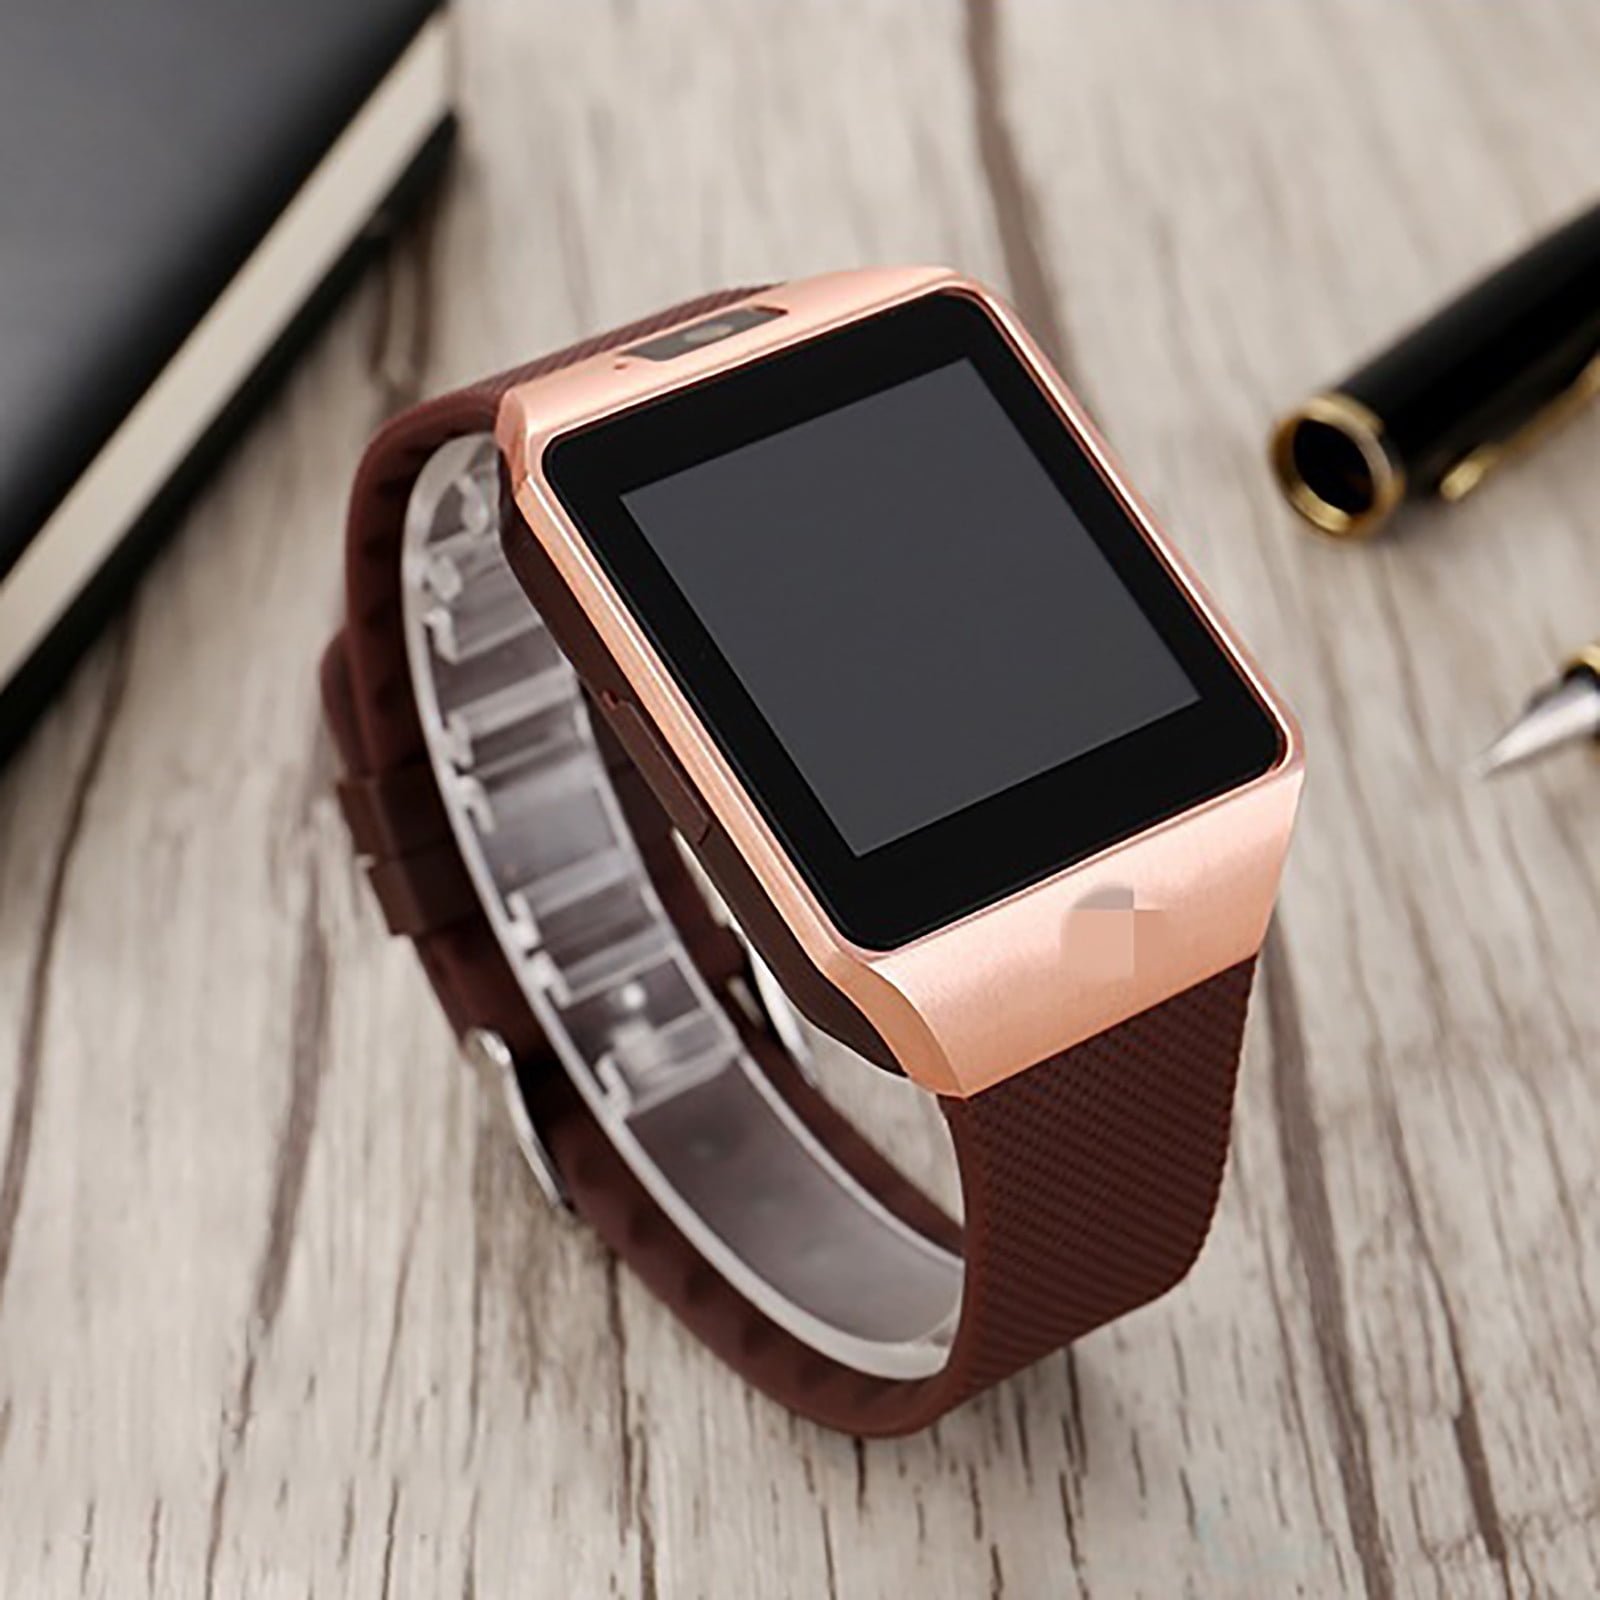 Cater boom Triumferende Bluetooth Smart Watch DZ09 Smartwatch Android Phone Call Connect Watch  Men,Christmas Festival Valentine's Day Birthday Gift - Walmart.com